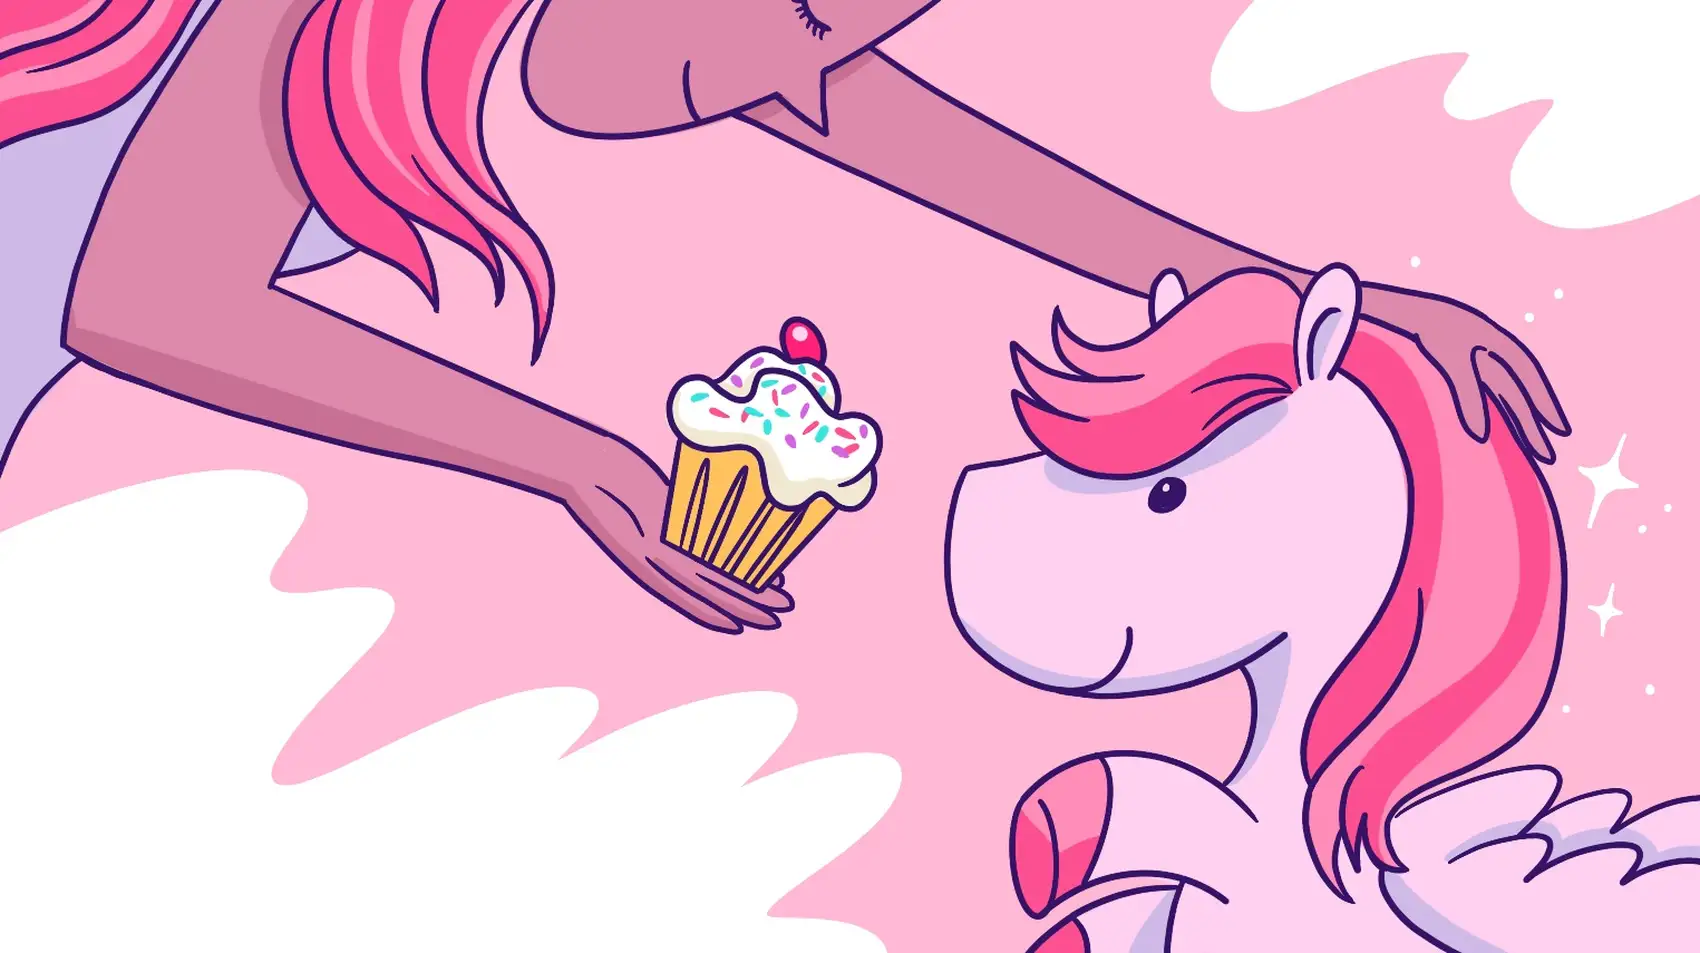 A girl feeding a cupcake to the Django pony in the clouds. The cupcake is topped with a cherry with light cream and sprinkles.